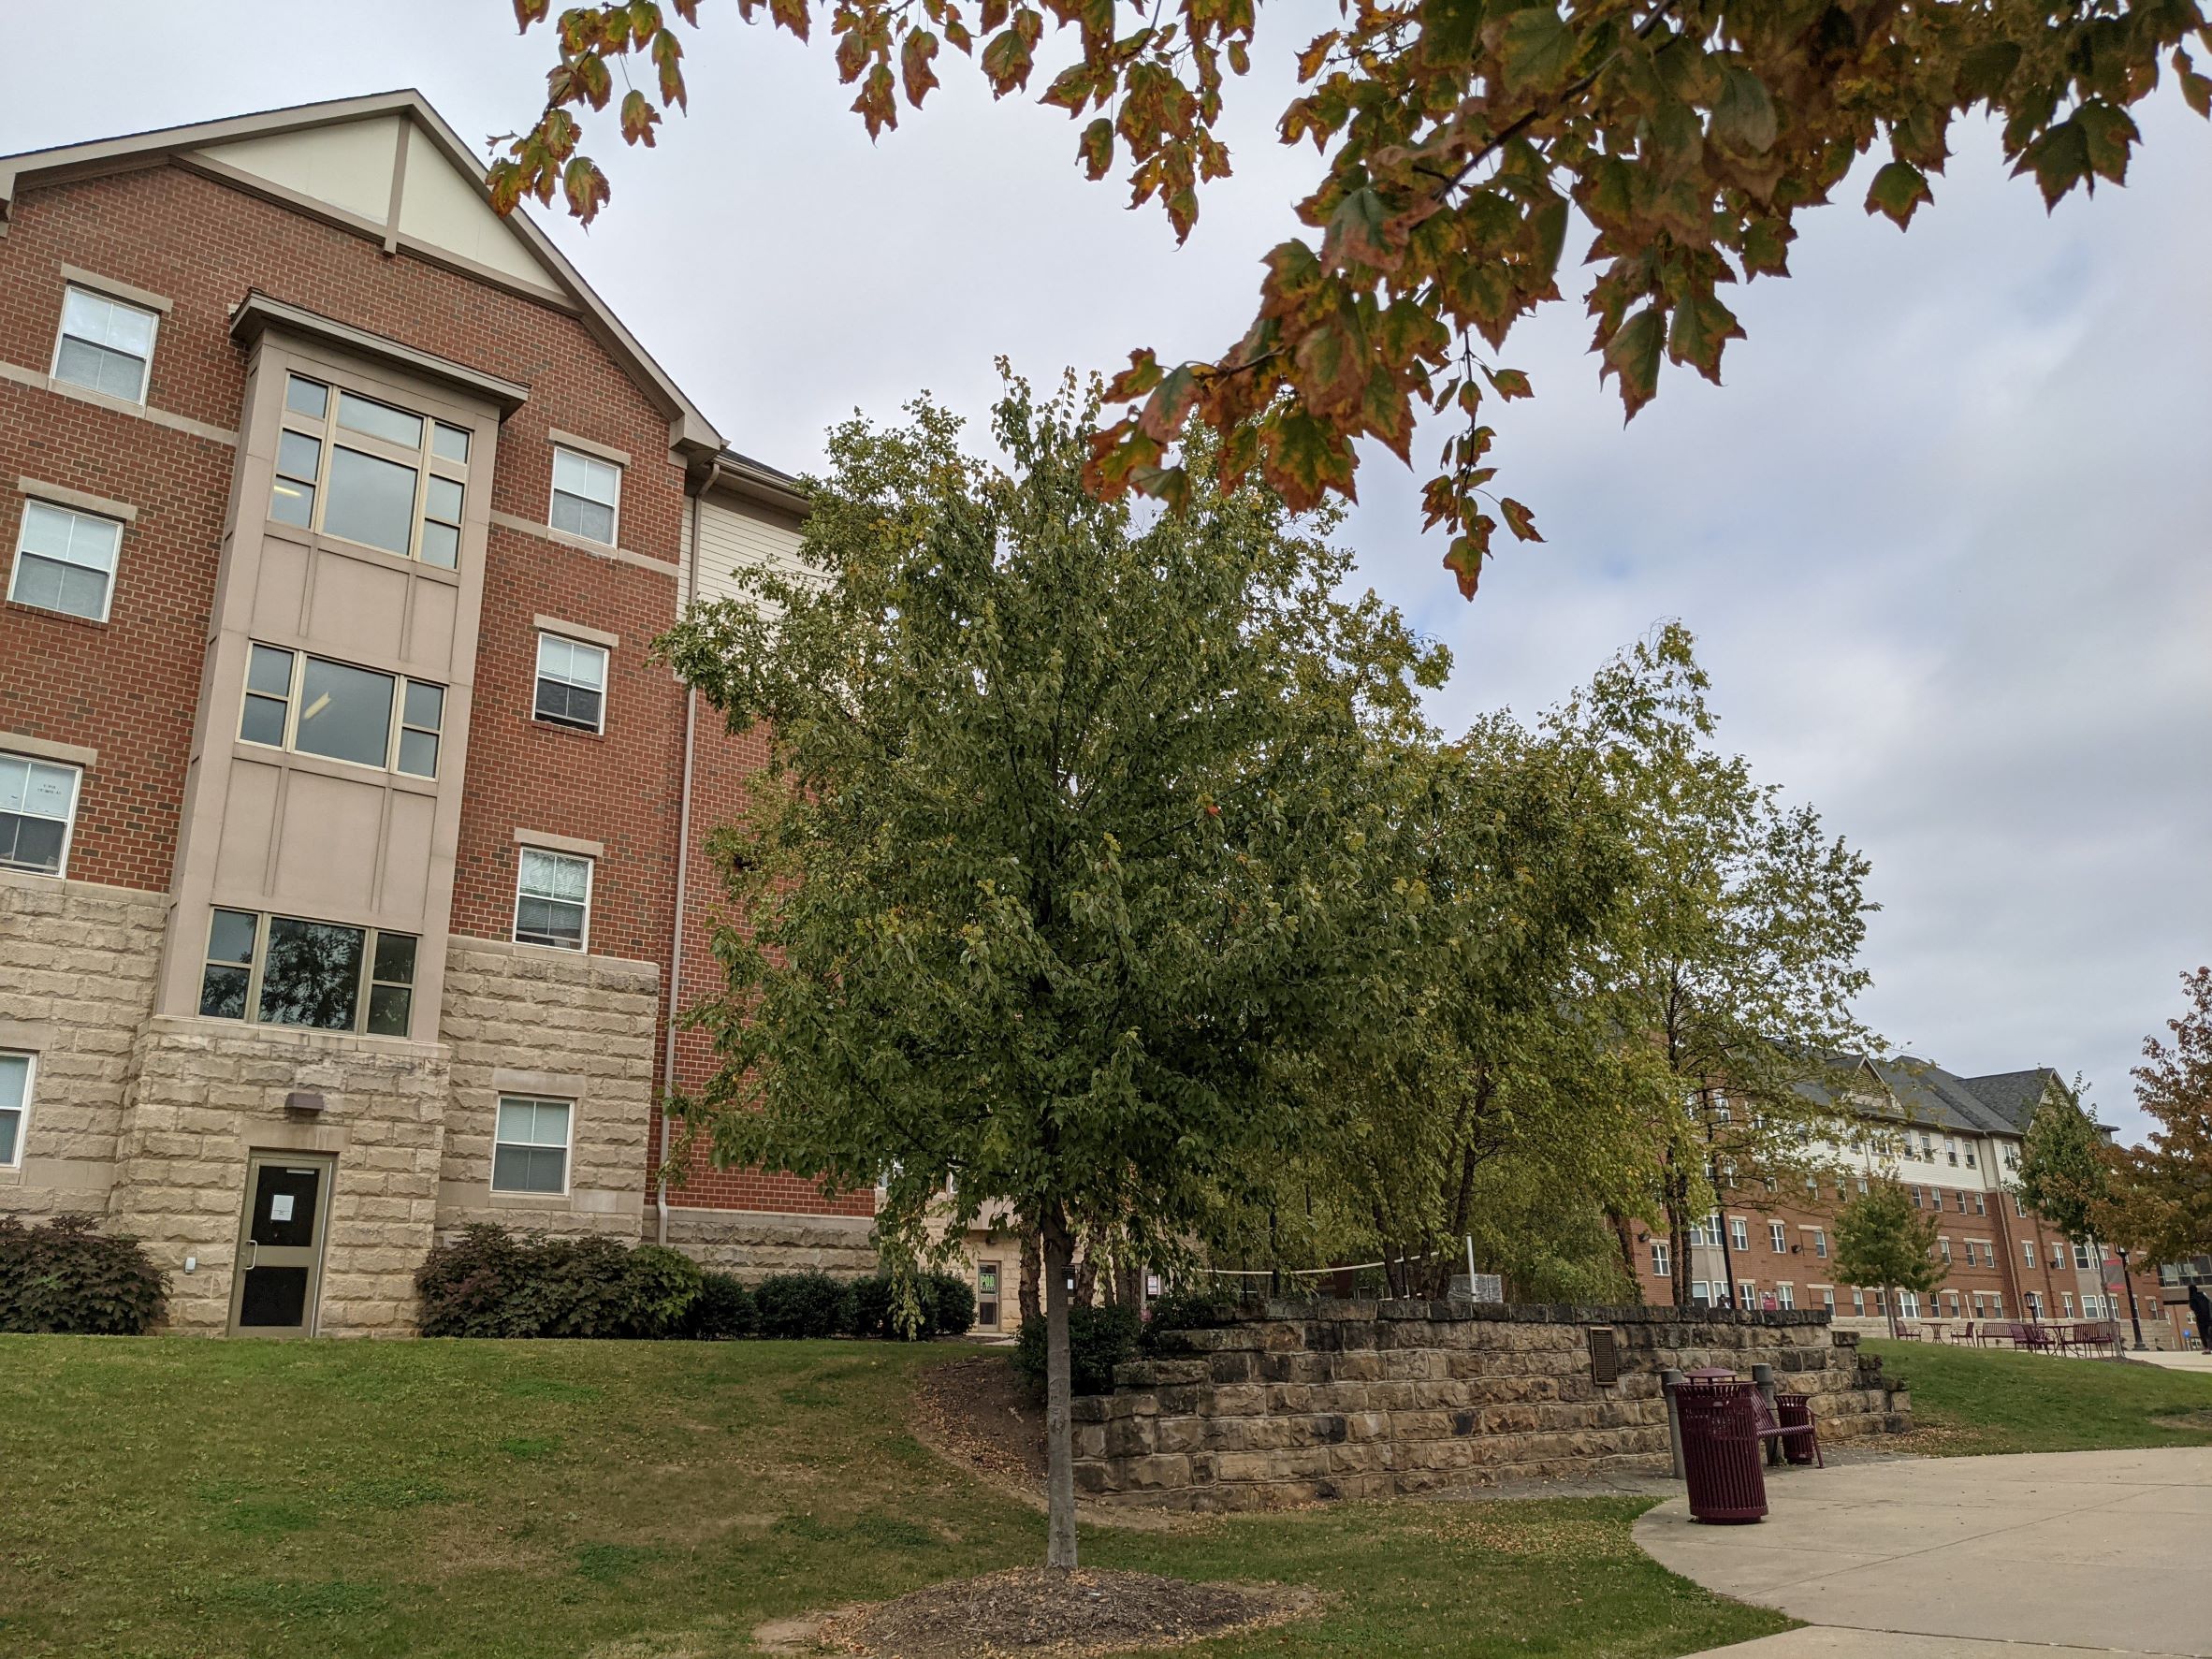 Large red brick gable with tan accents in contemporary living learning student housing community dormitory building with stone retaining wall behind plaza in foreground